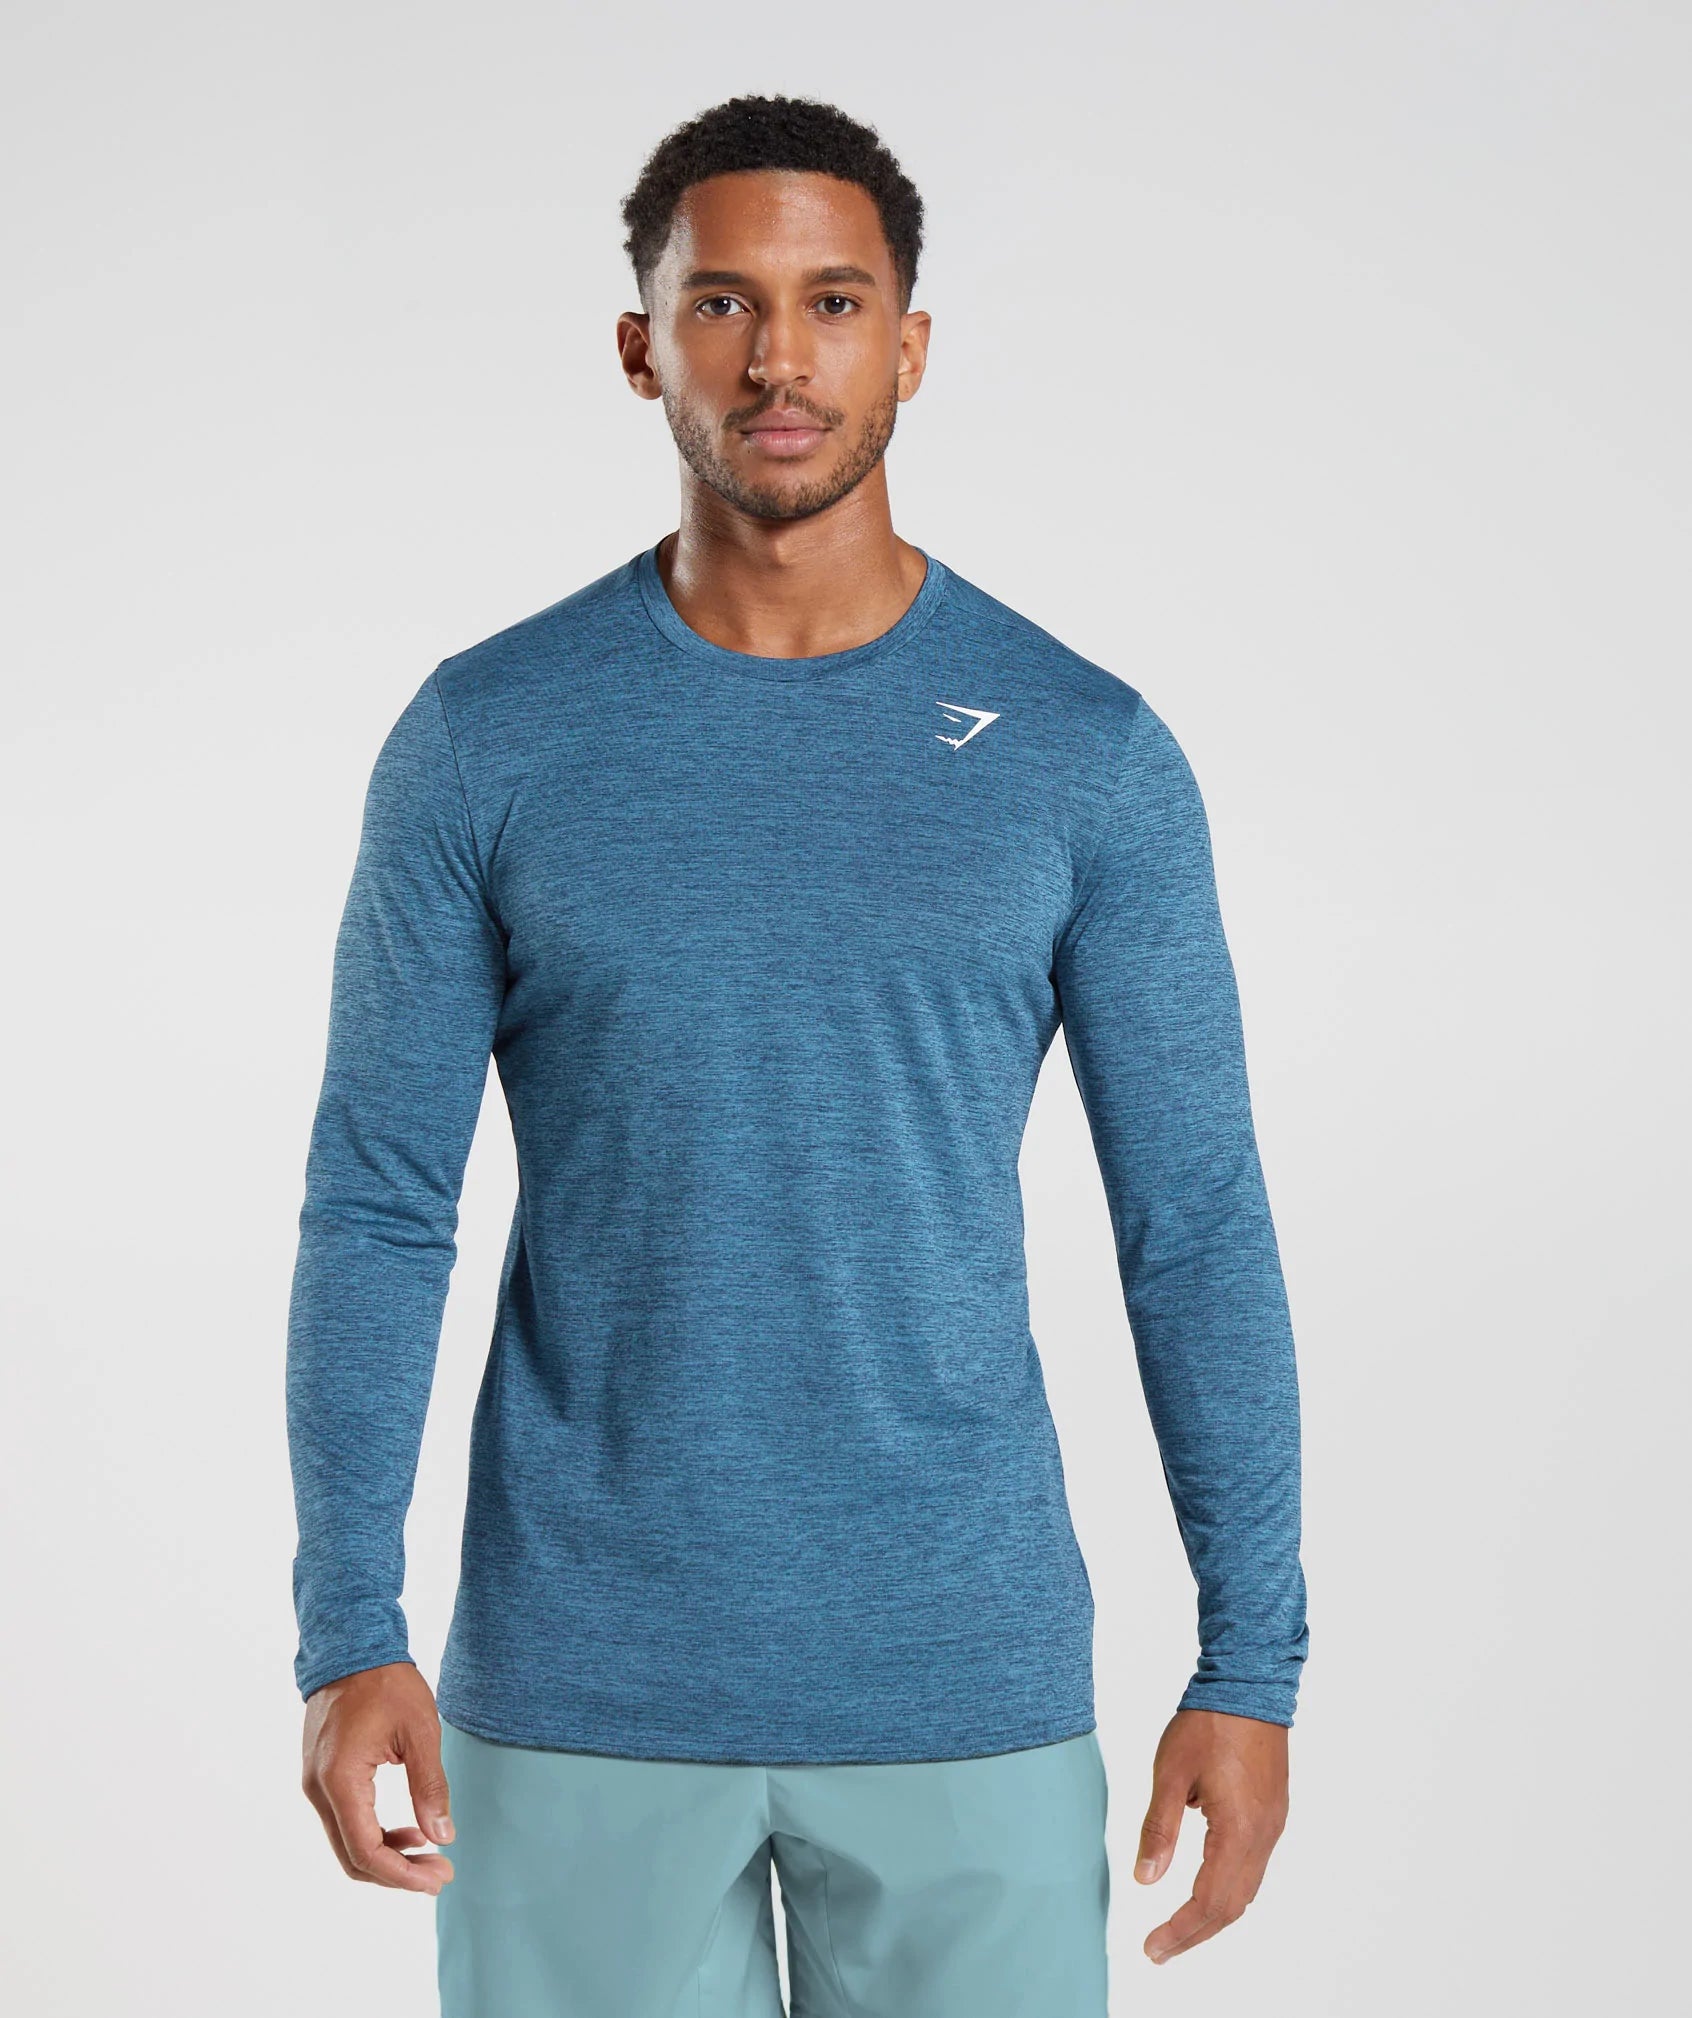 Arrival Marl Long Sleeve T-Shirt in Navy/Lakeside Blue Marl - view 1